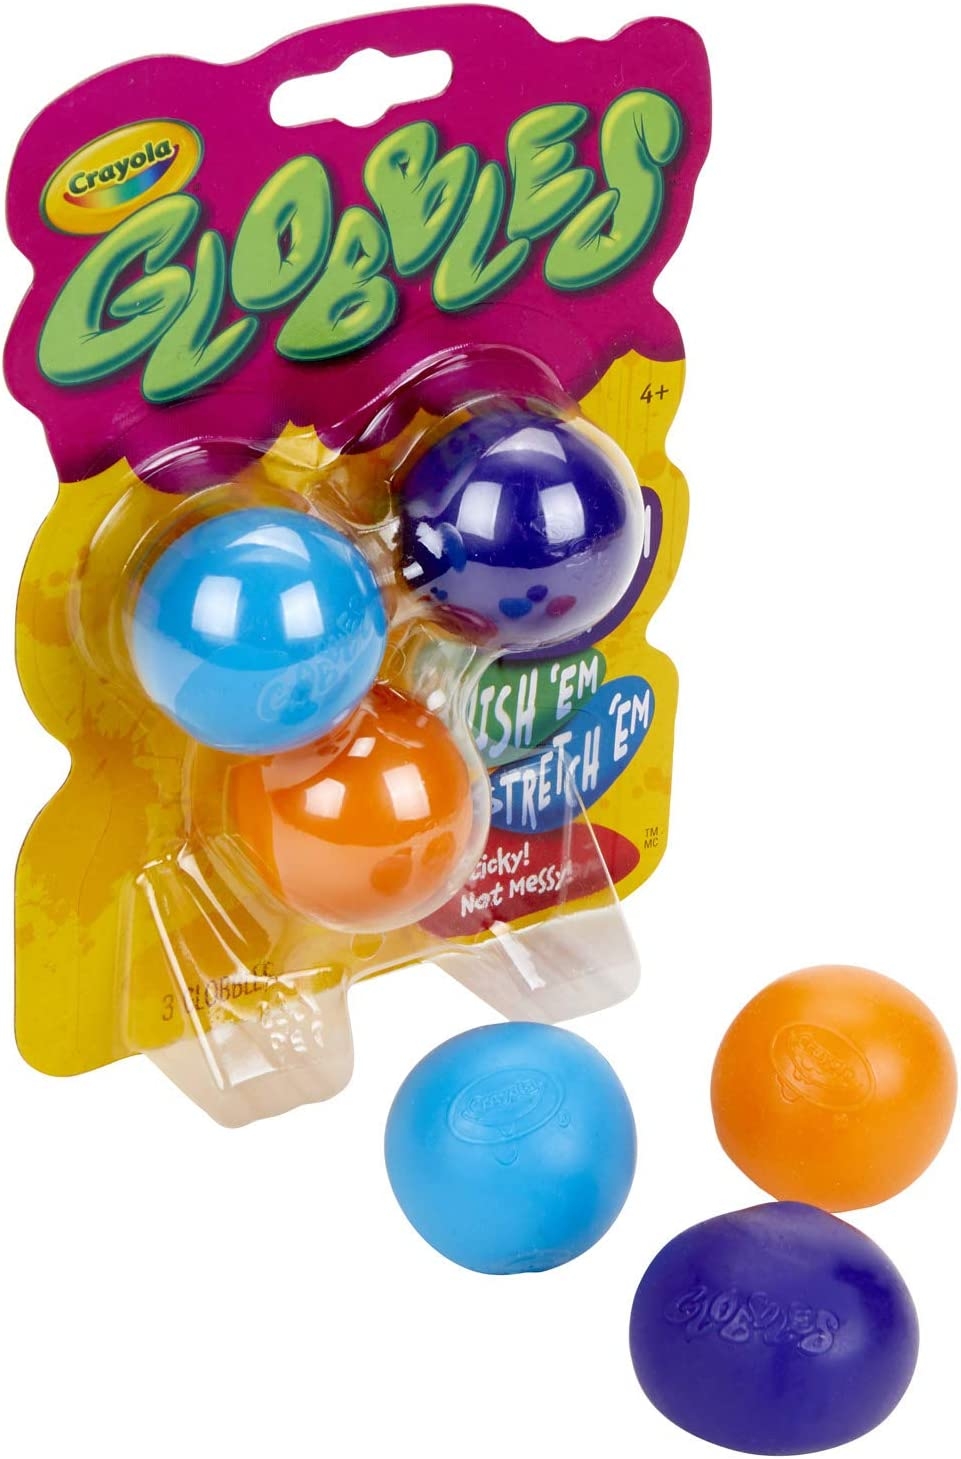 Crayola 74-7291 Globbles 3 in a Package, Assorted Colors Import To Shop ×Product customization General Description Gallery